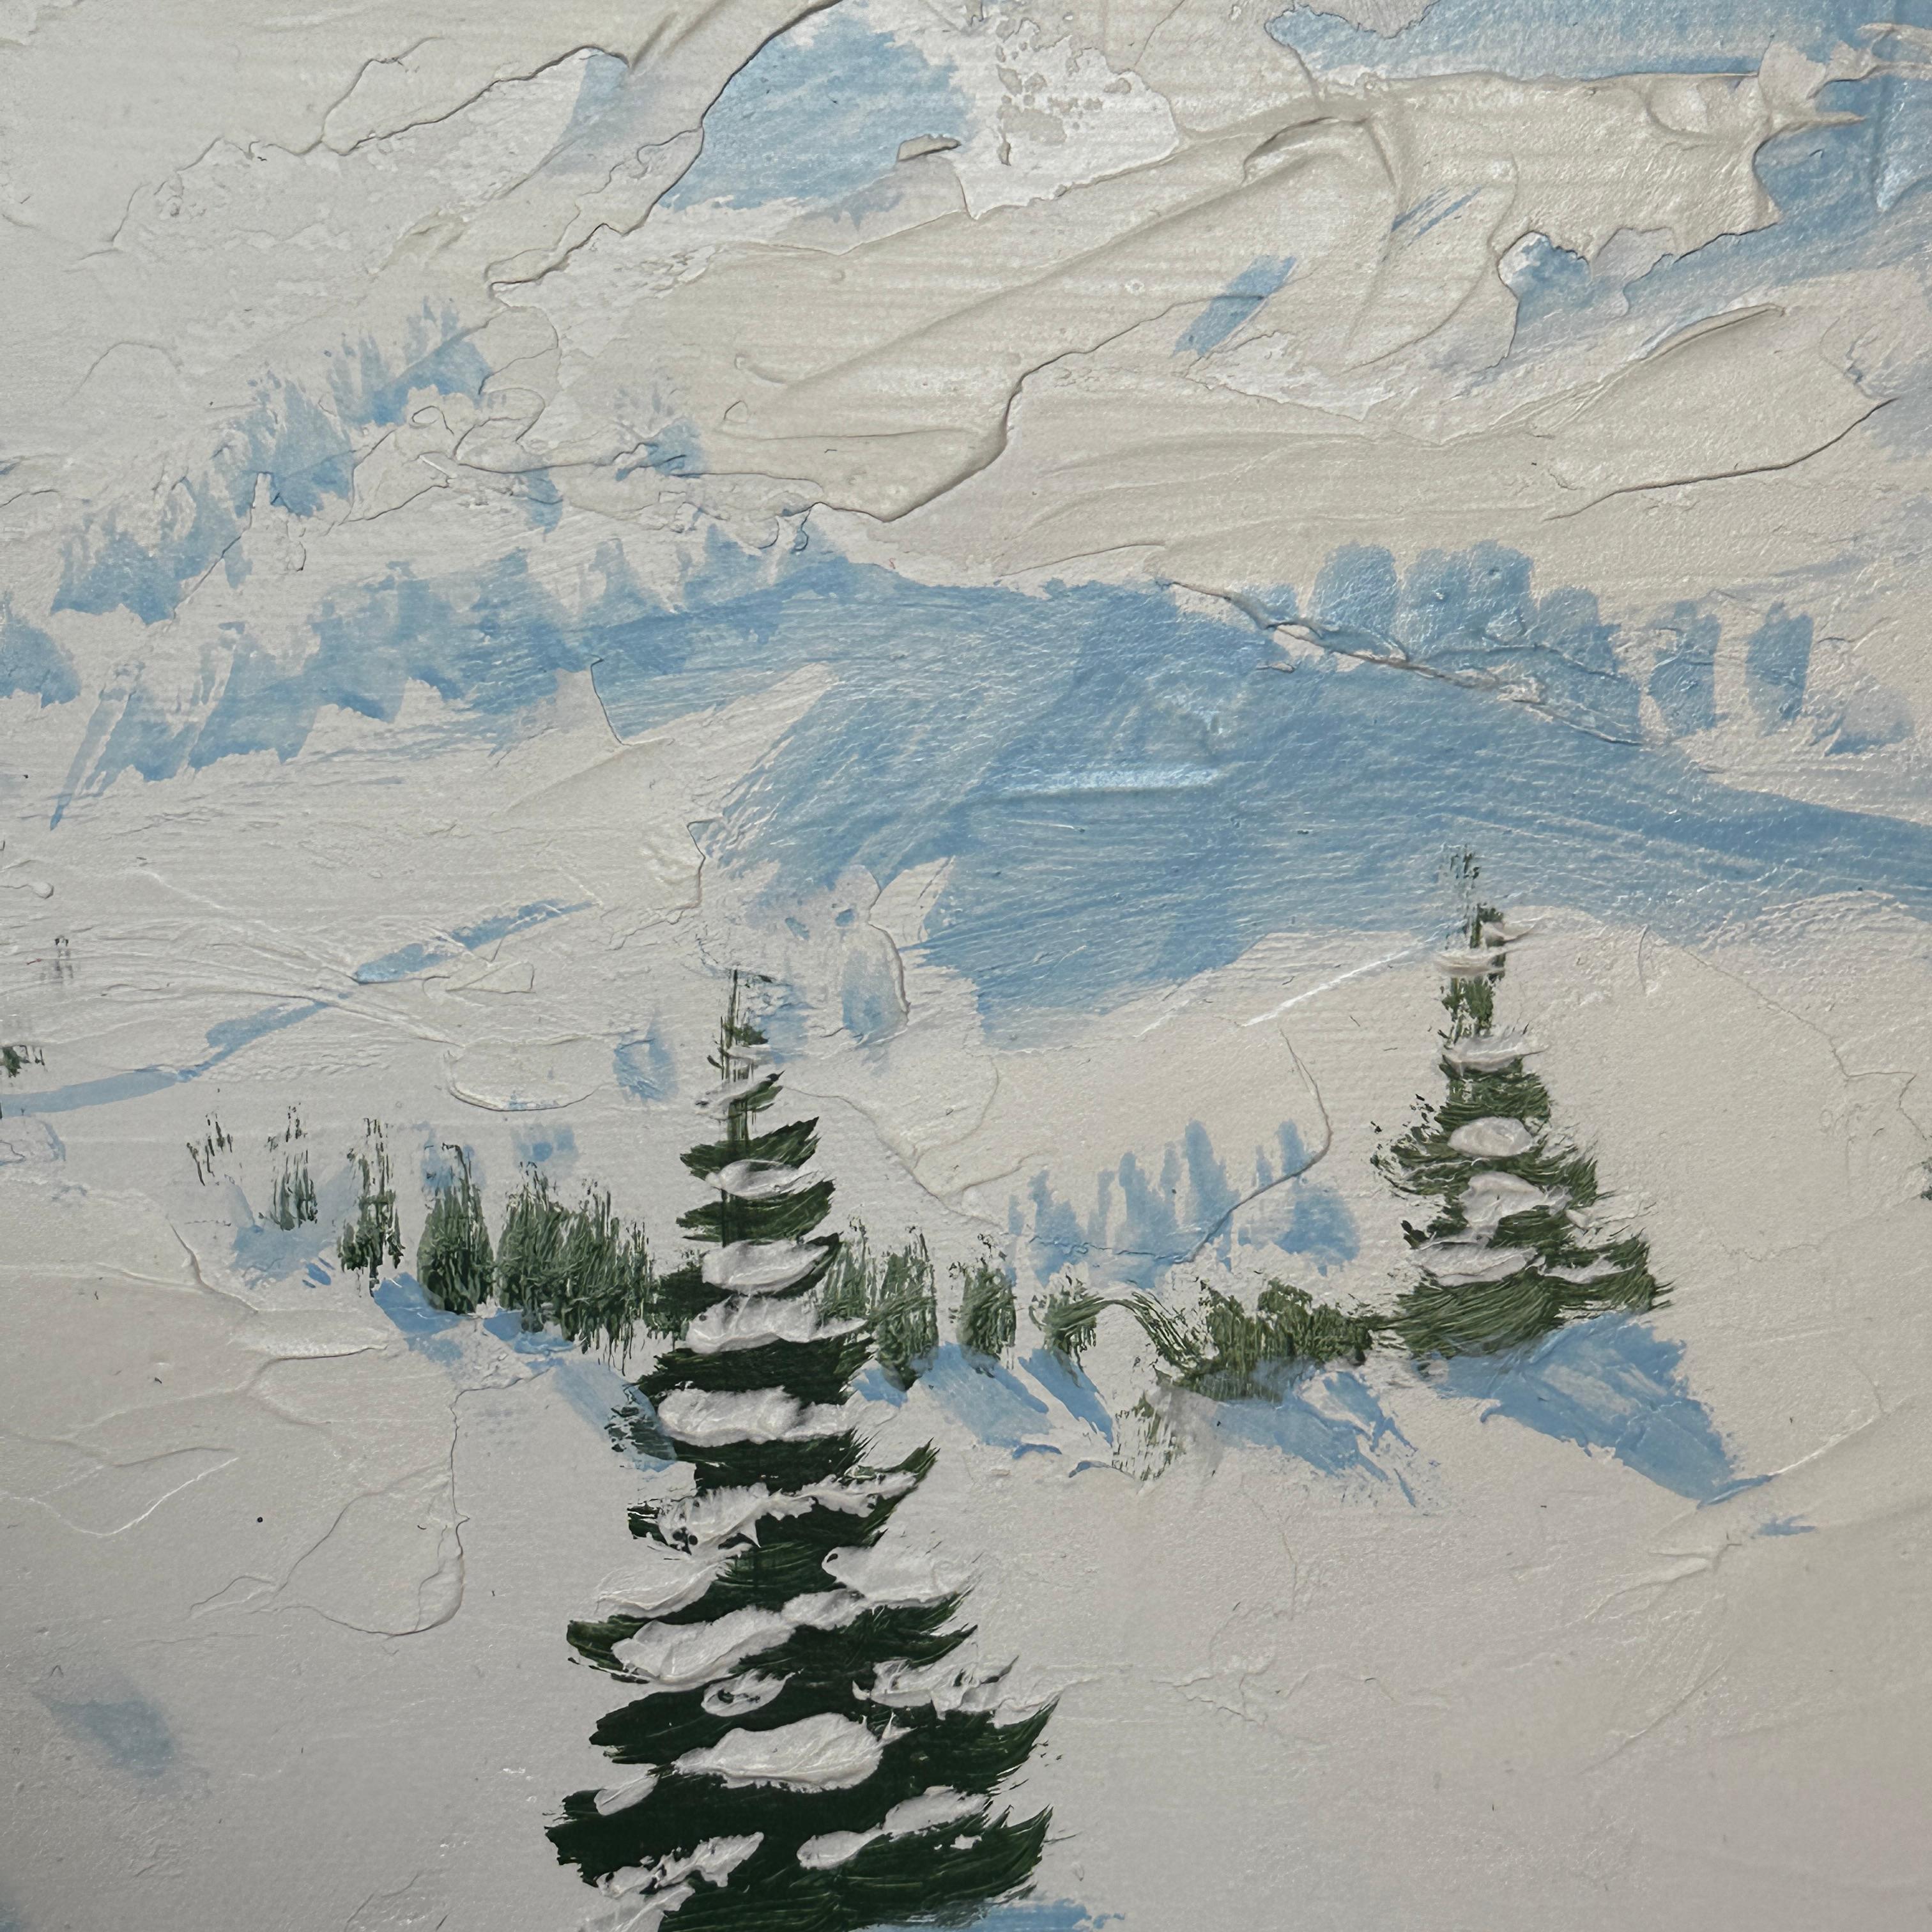 'Down the Slopes' is a fun and vibrant contemporary 3D painting of skiers, mountains, trees and figures by Max Todd. Inspired by skiing holidays Todd has created a work that makes you dream of the slopes! 

Max Todd uses contemporary techniques to